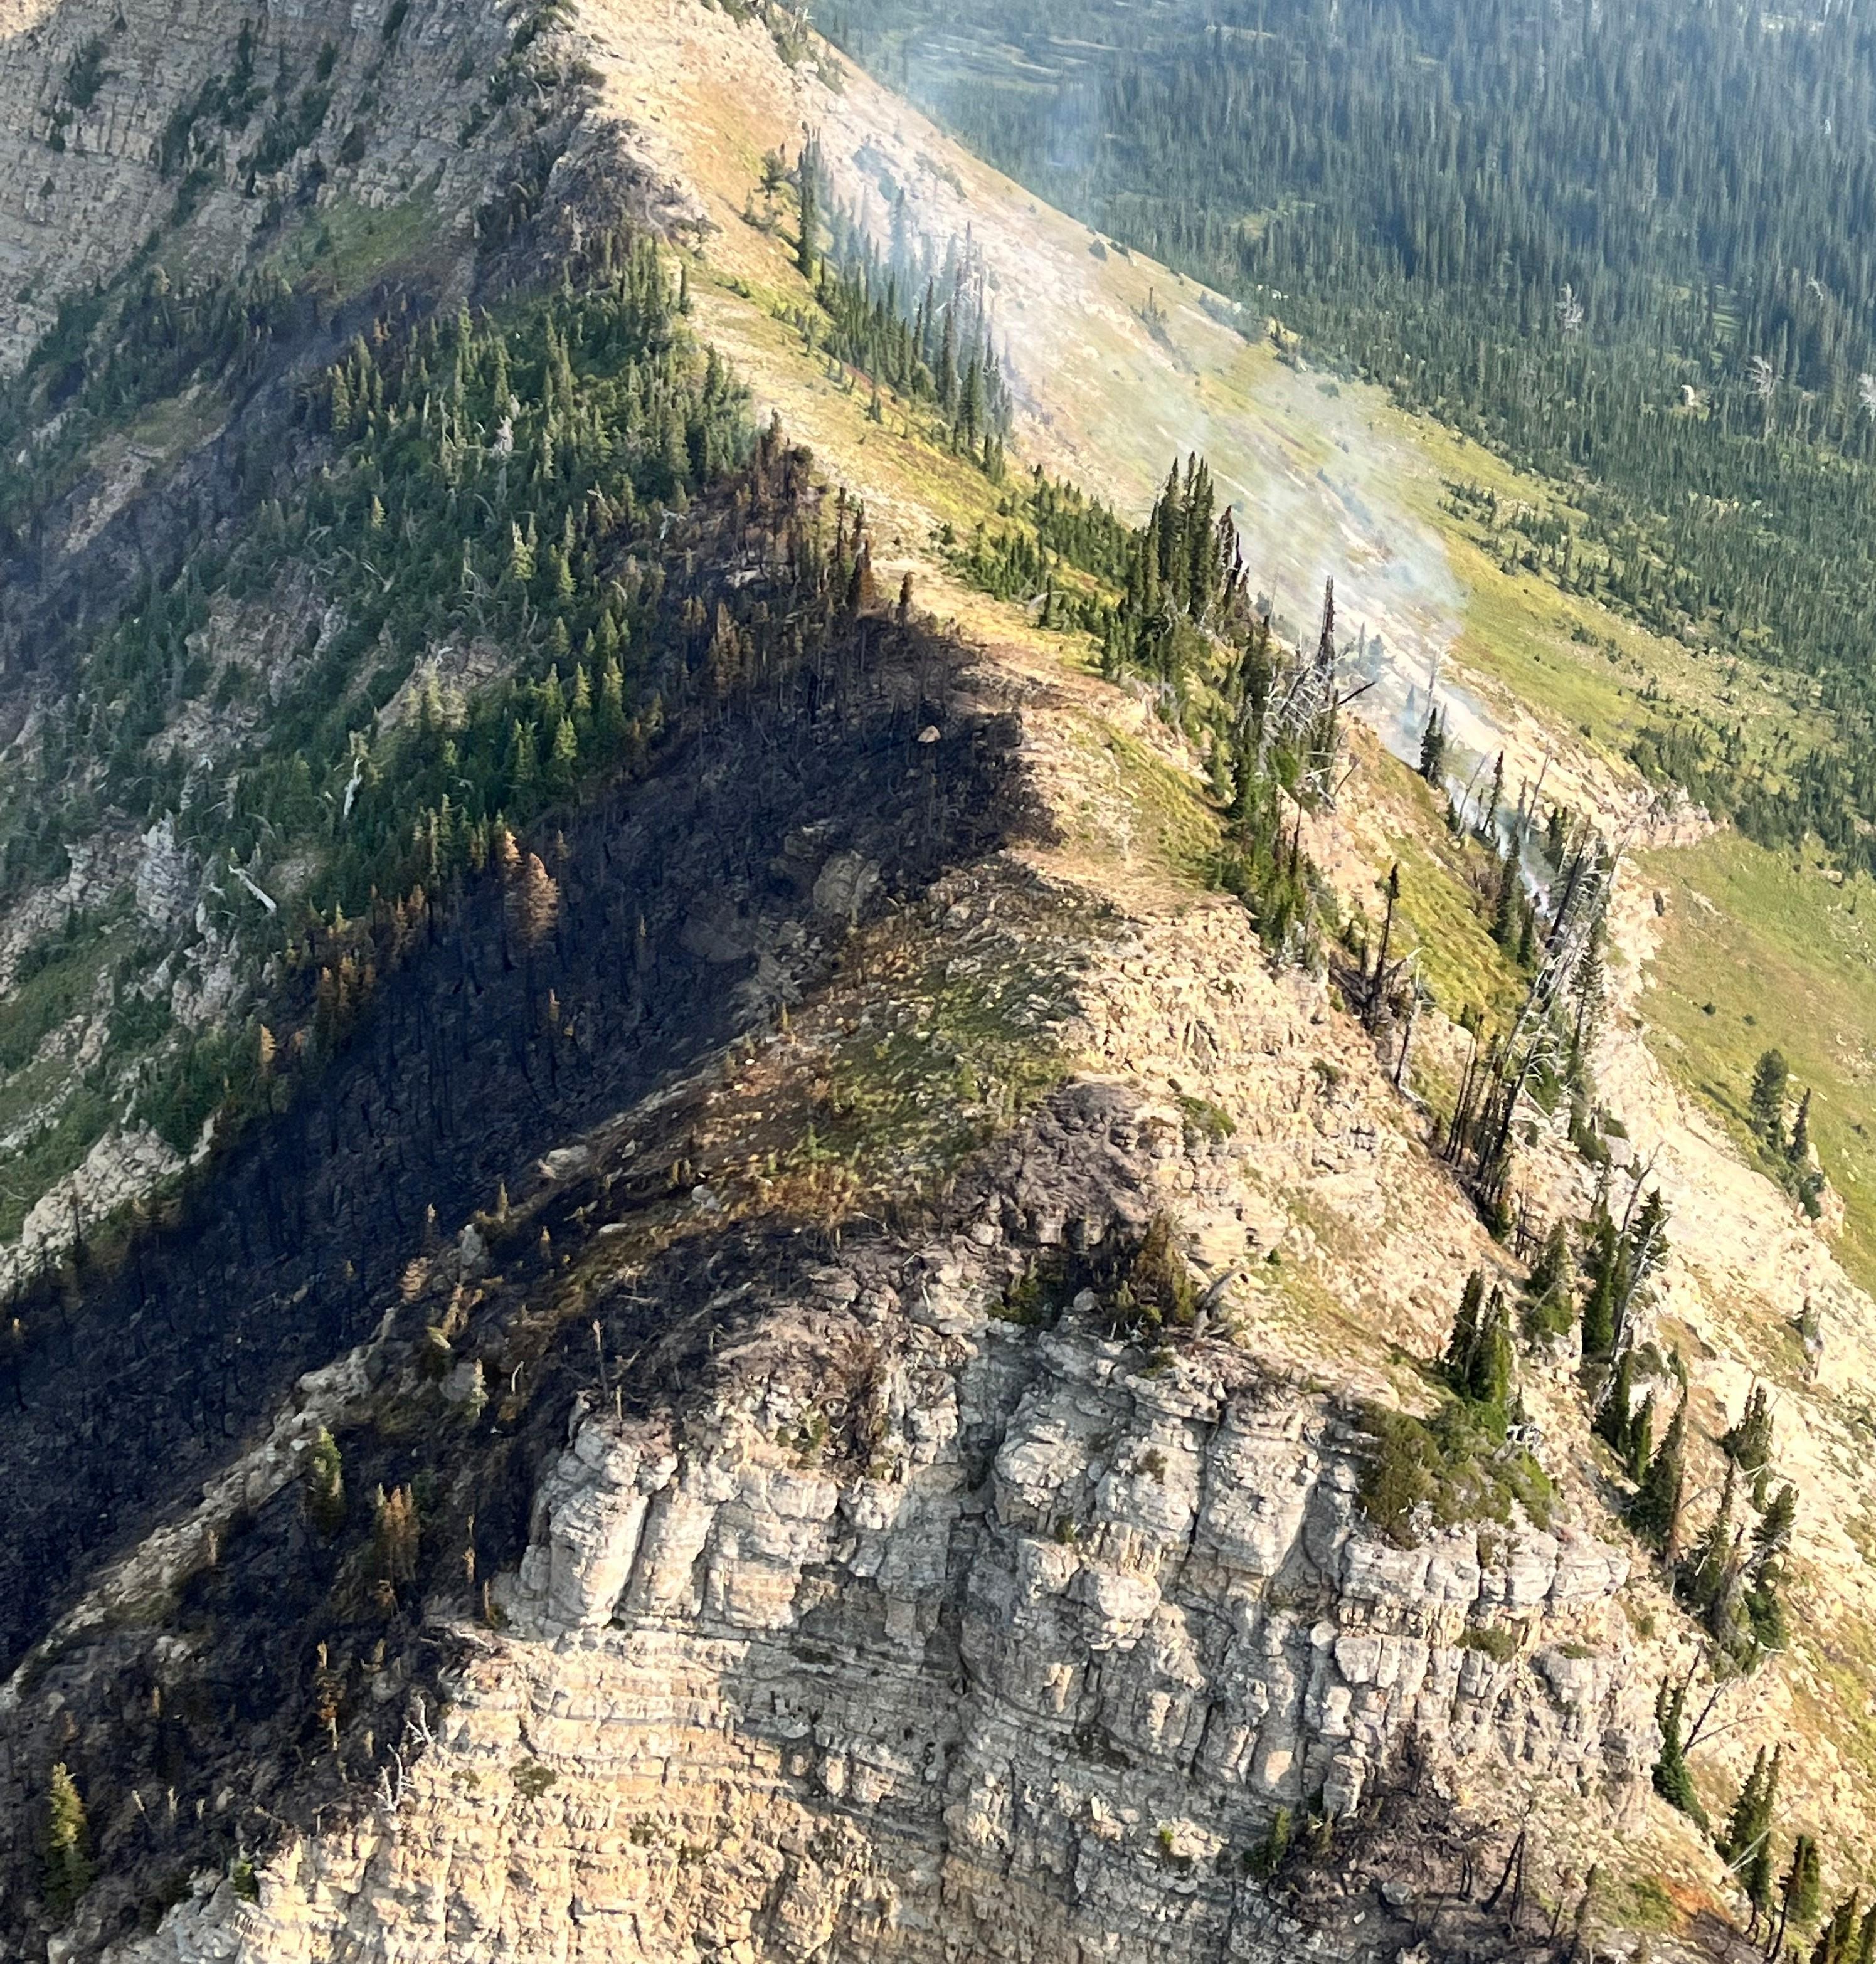 Aerial view of a rocky ridge, with a burned area on one side and a small wisp of smoke on the other side.